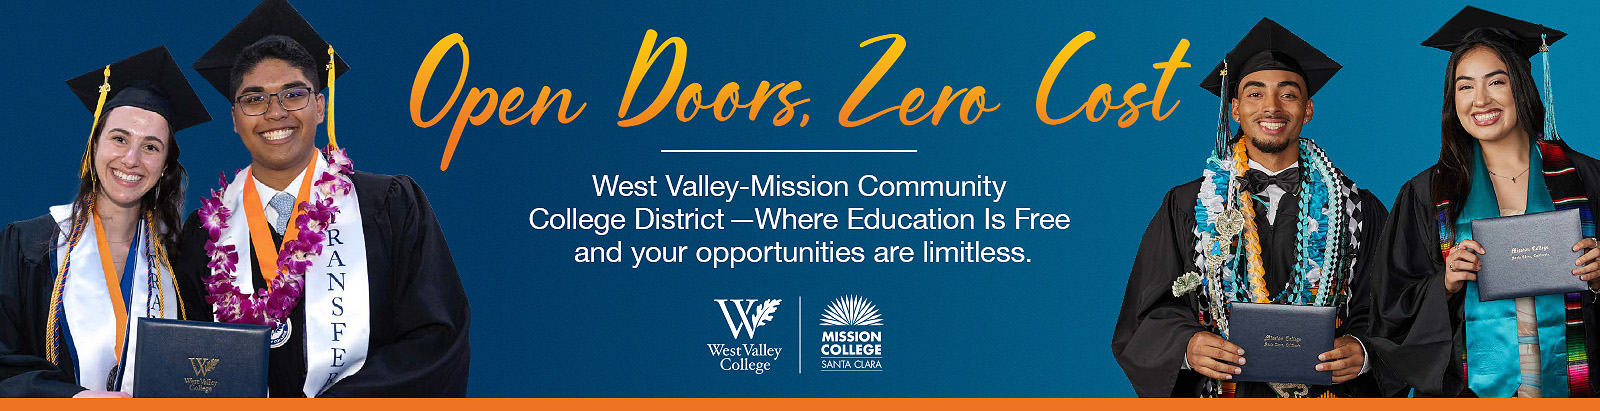 Open doors, open eduction. West Valley Mission Community College District – where education is free and the opportunities are limitless